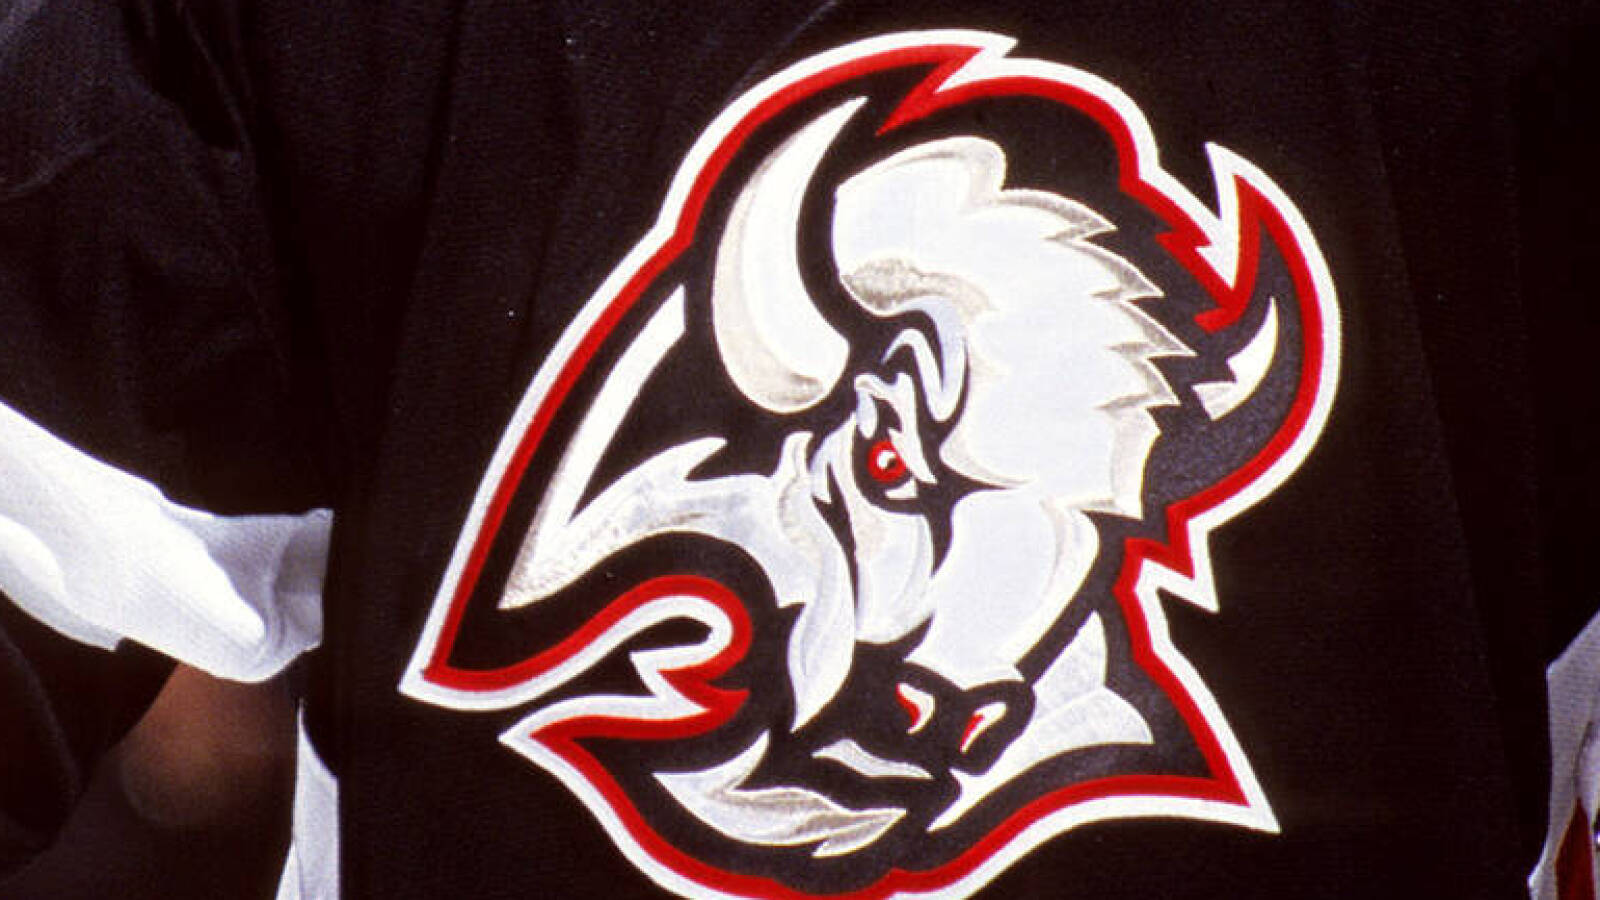 Sabres to Bring Back 'Goathead' as Alternate Jersey for 2022-23